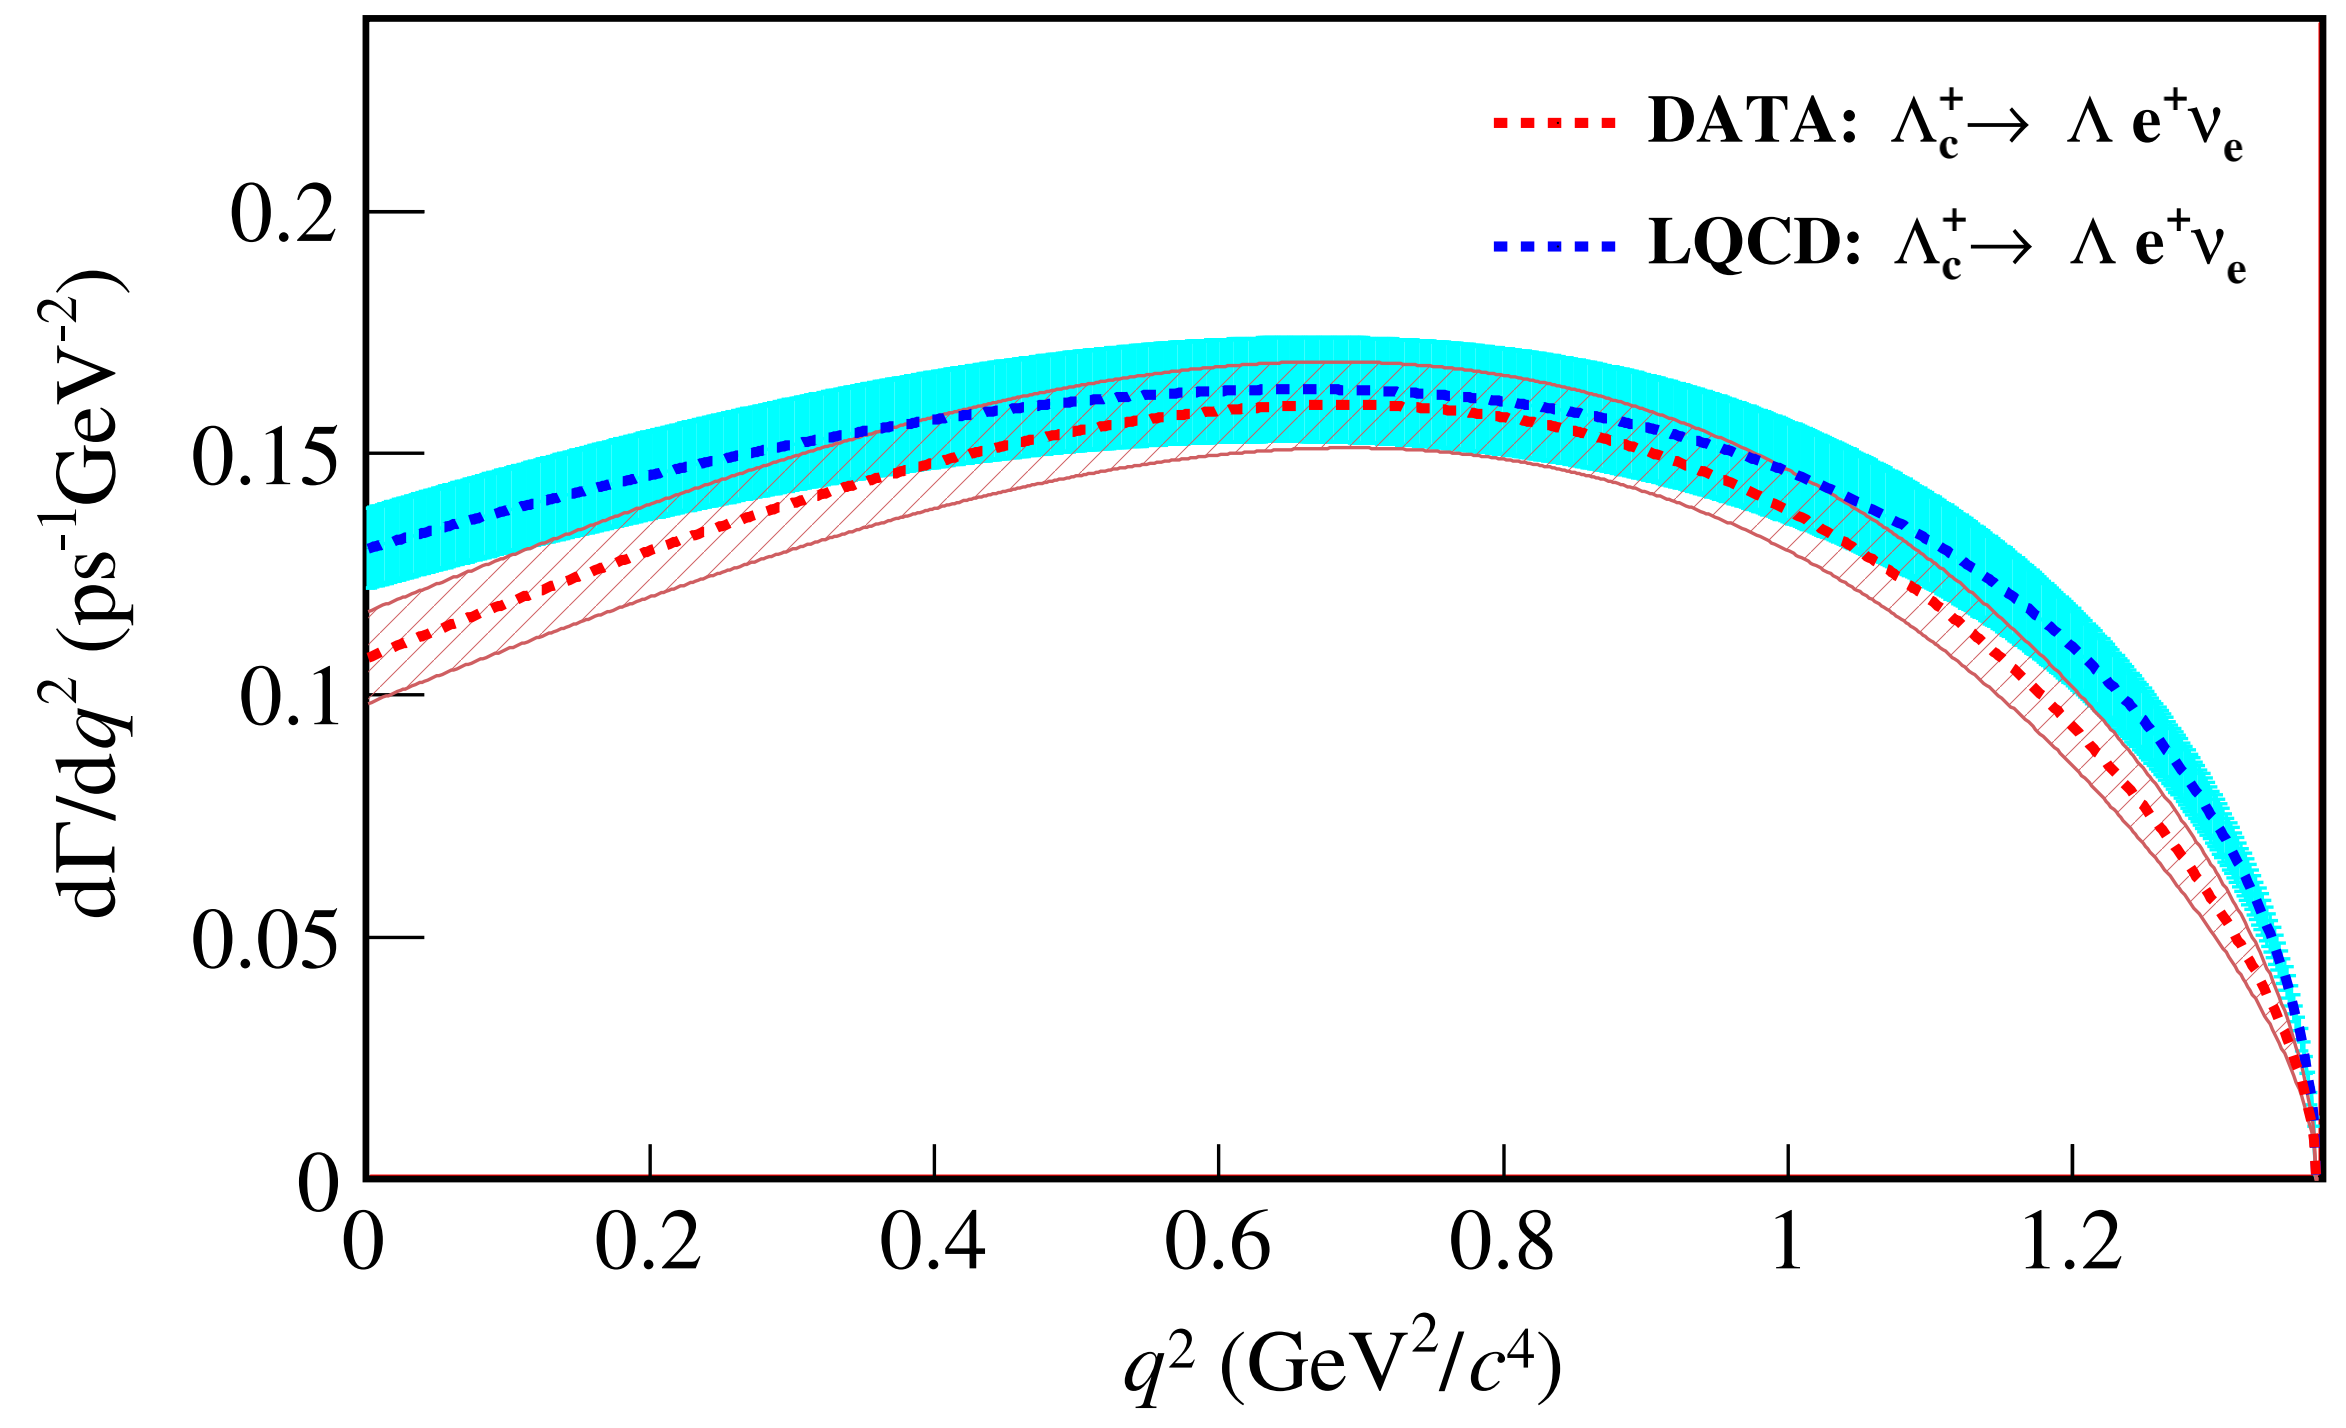 Study of the Semileptonic decay Λc+ to Λe+νe